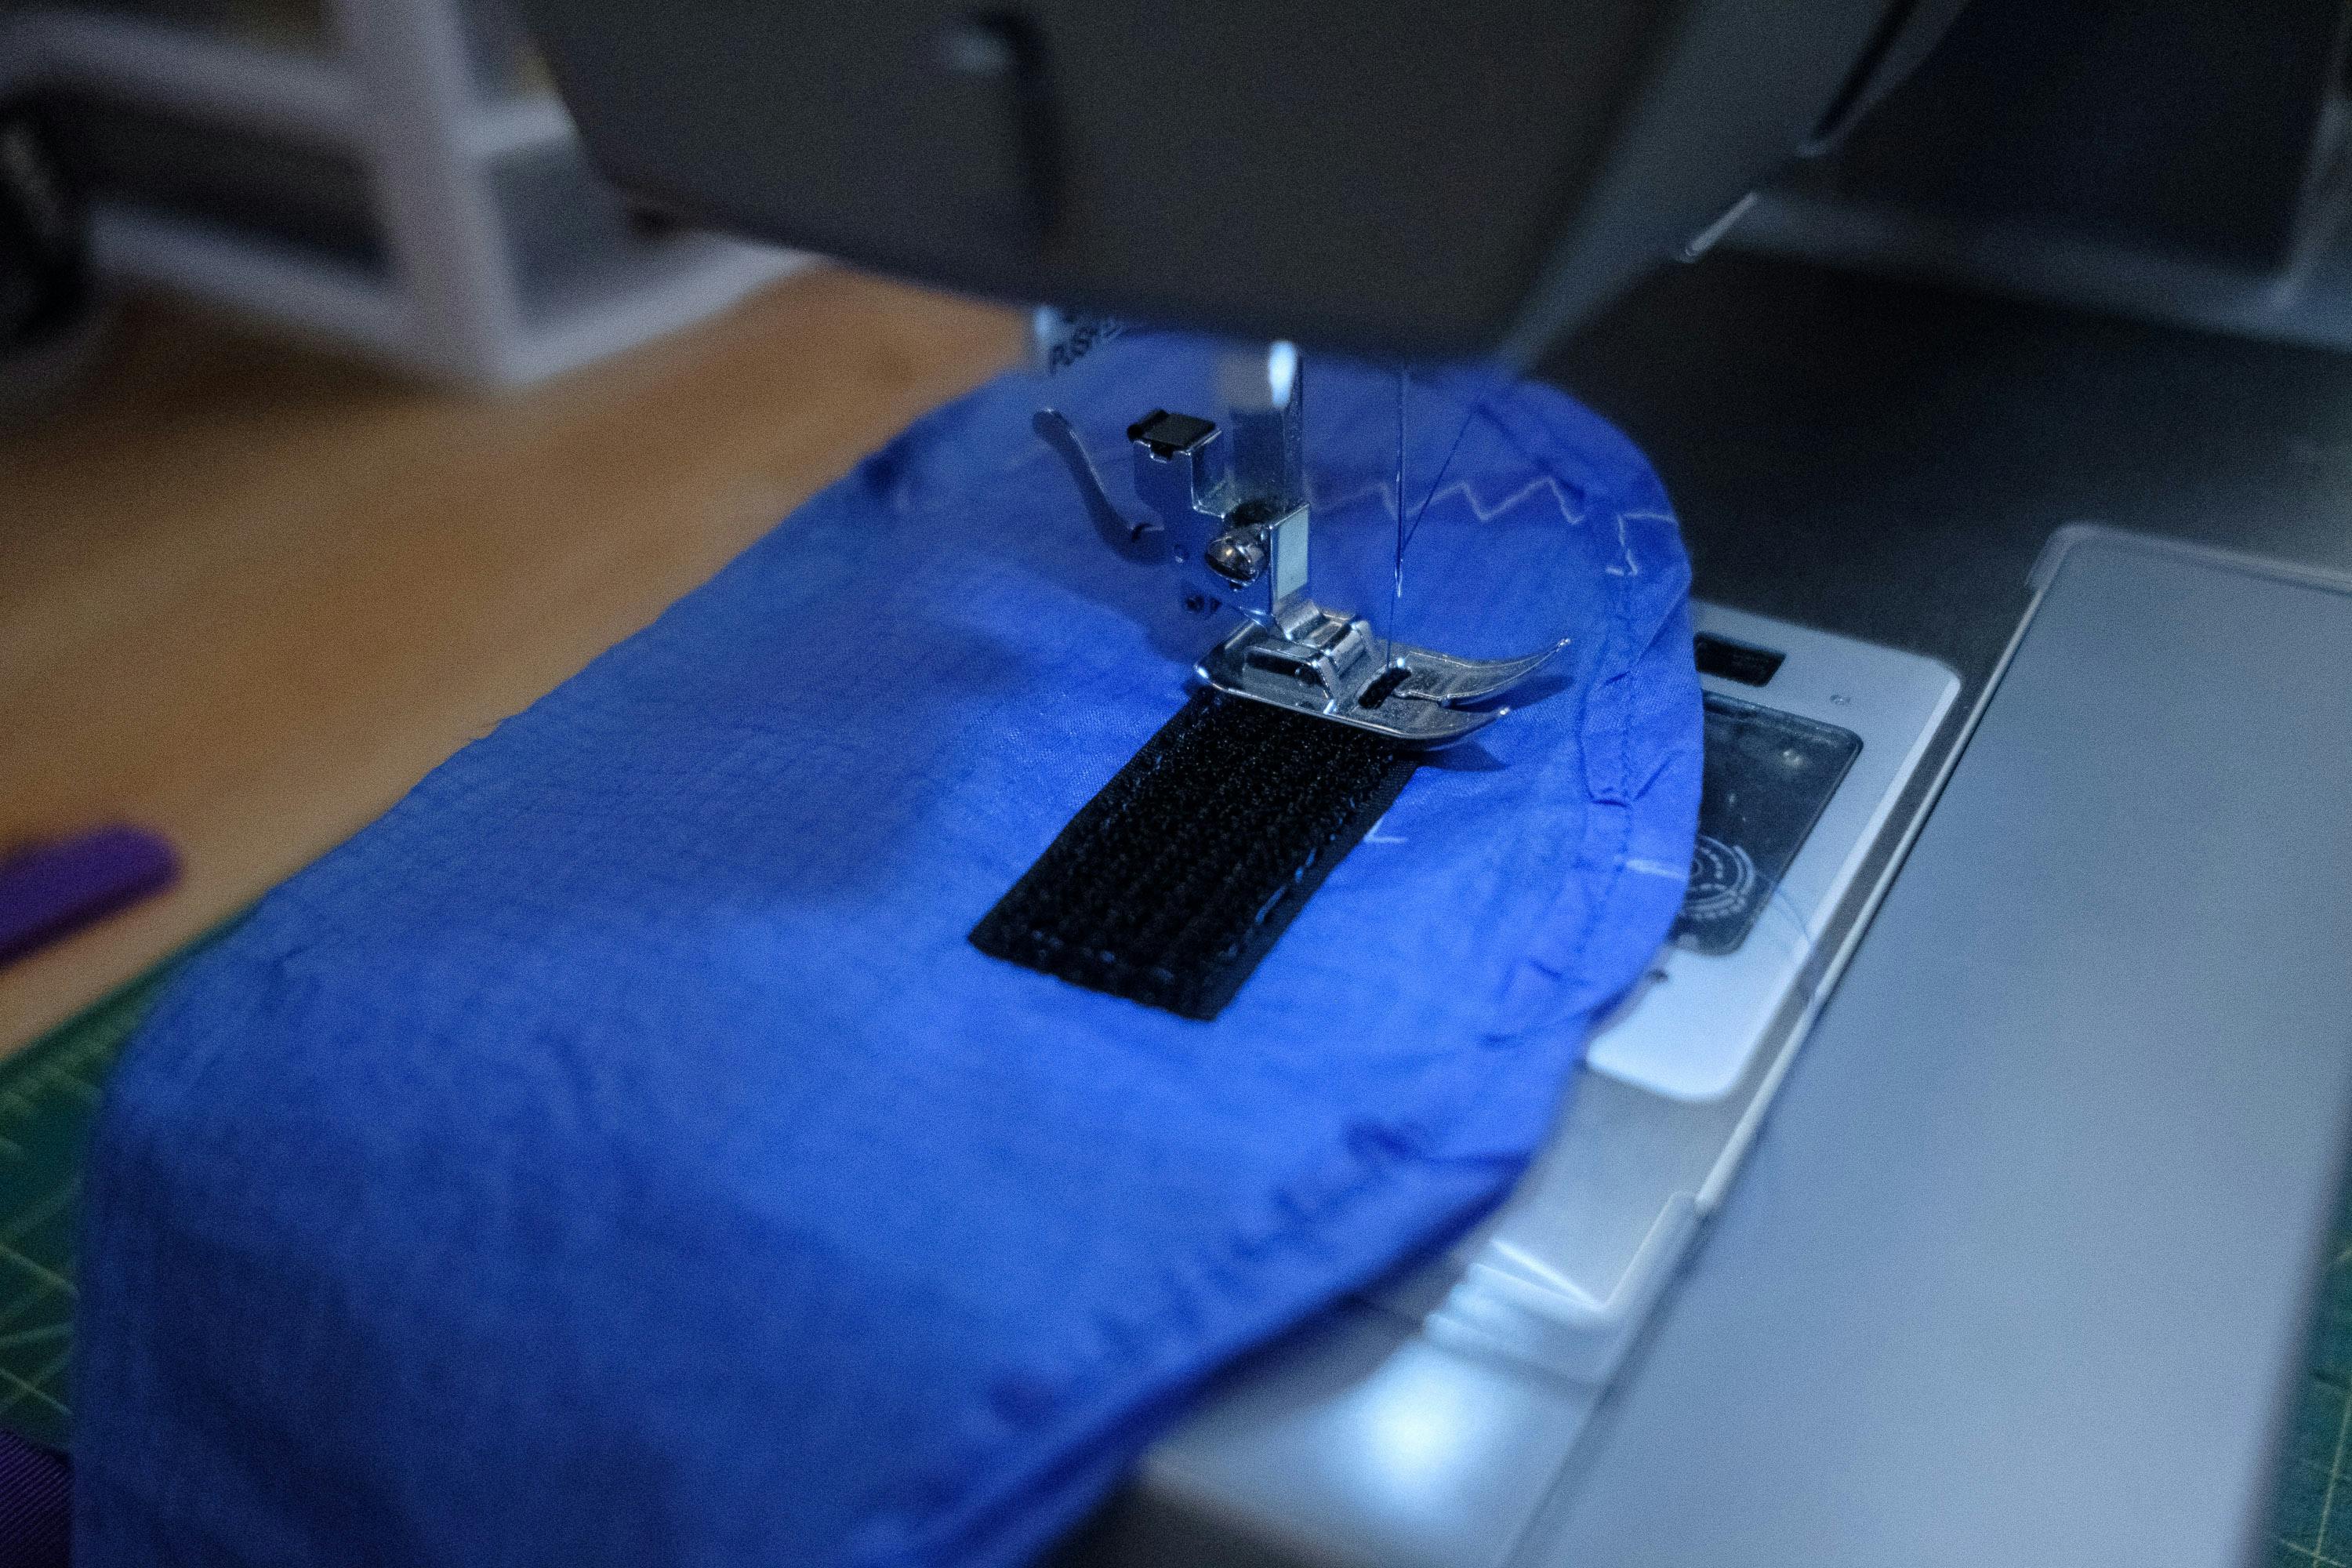 Stitching in the velcro.